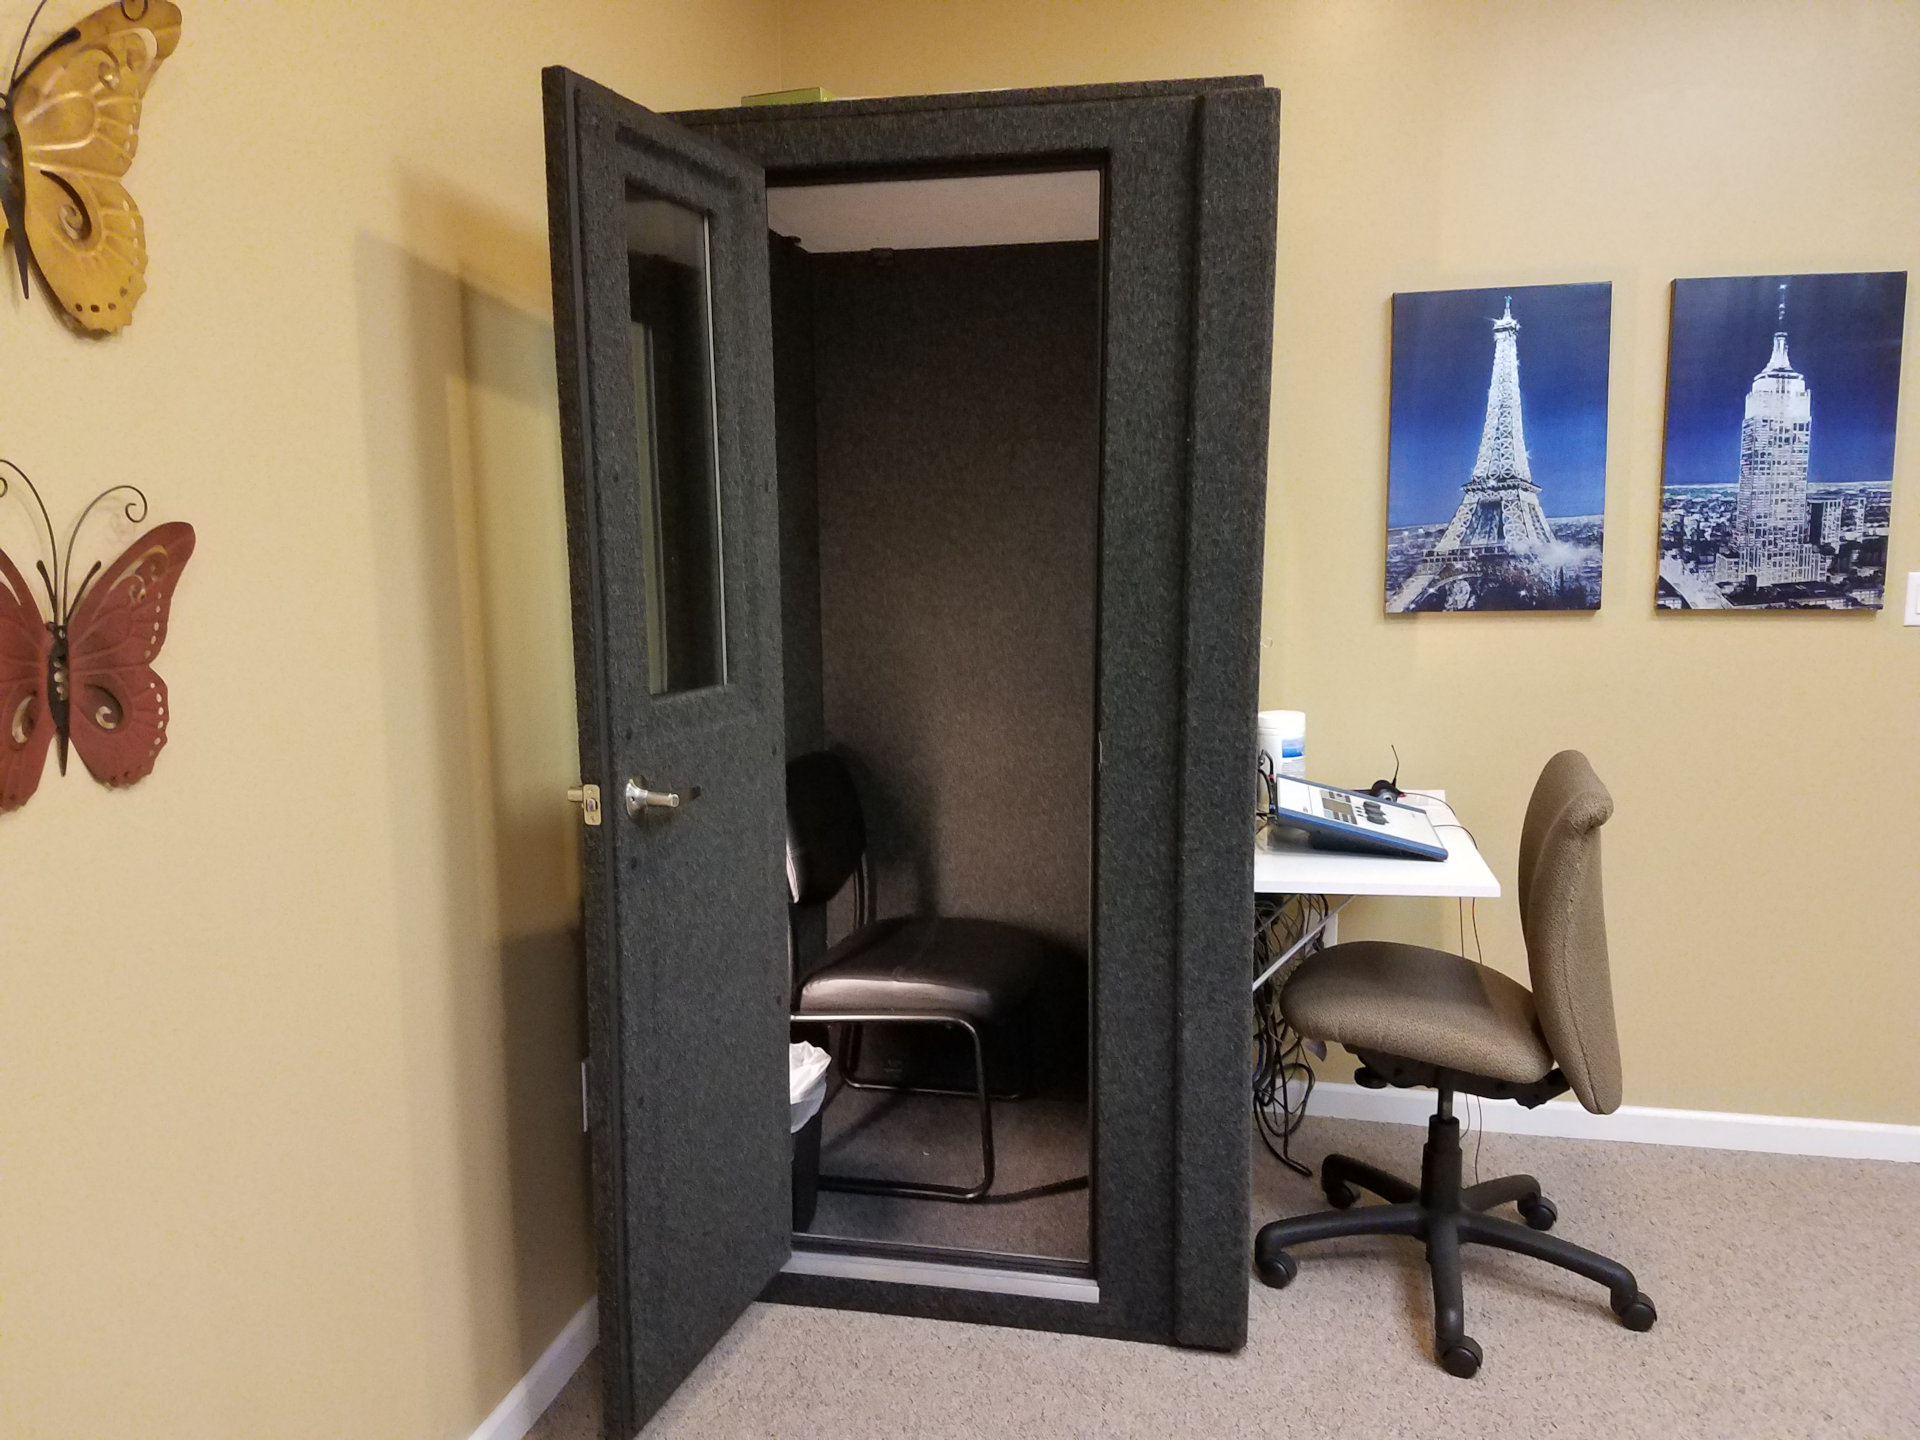 audio booth in corner with testing equipment and decorative images on walls